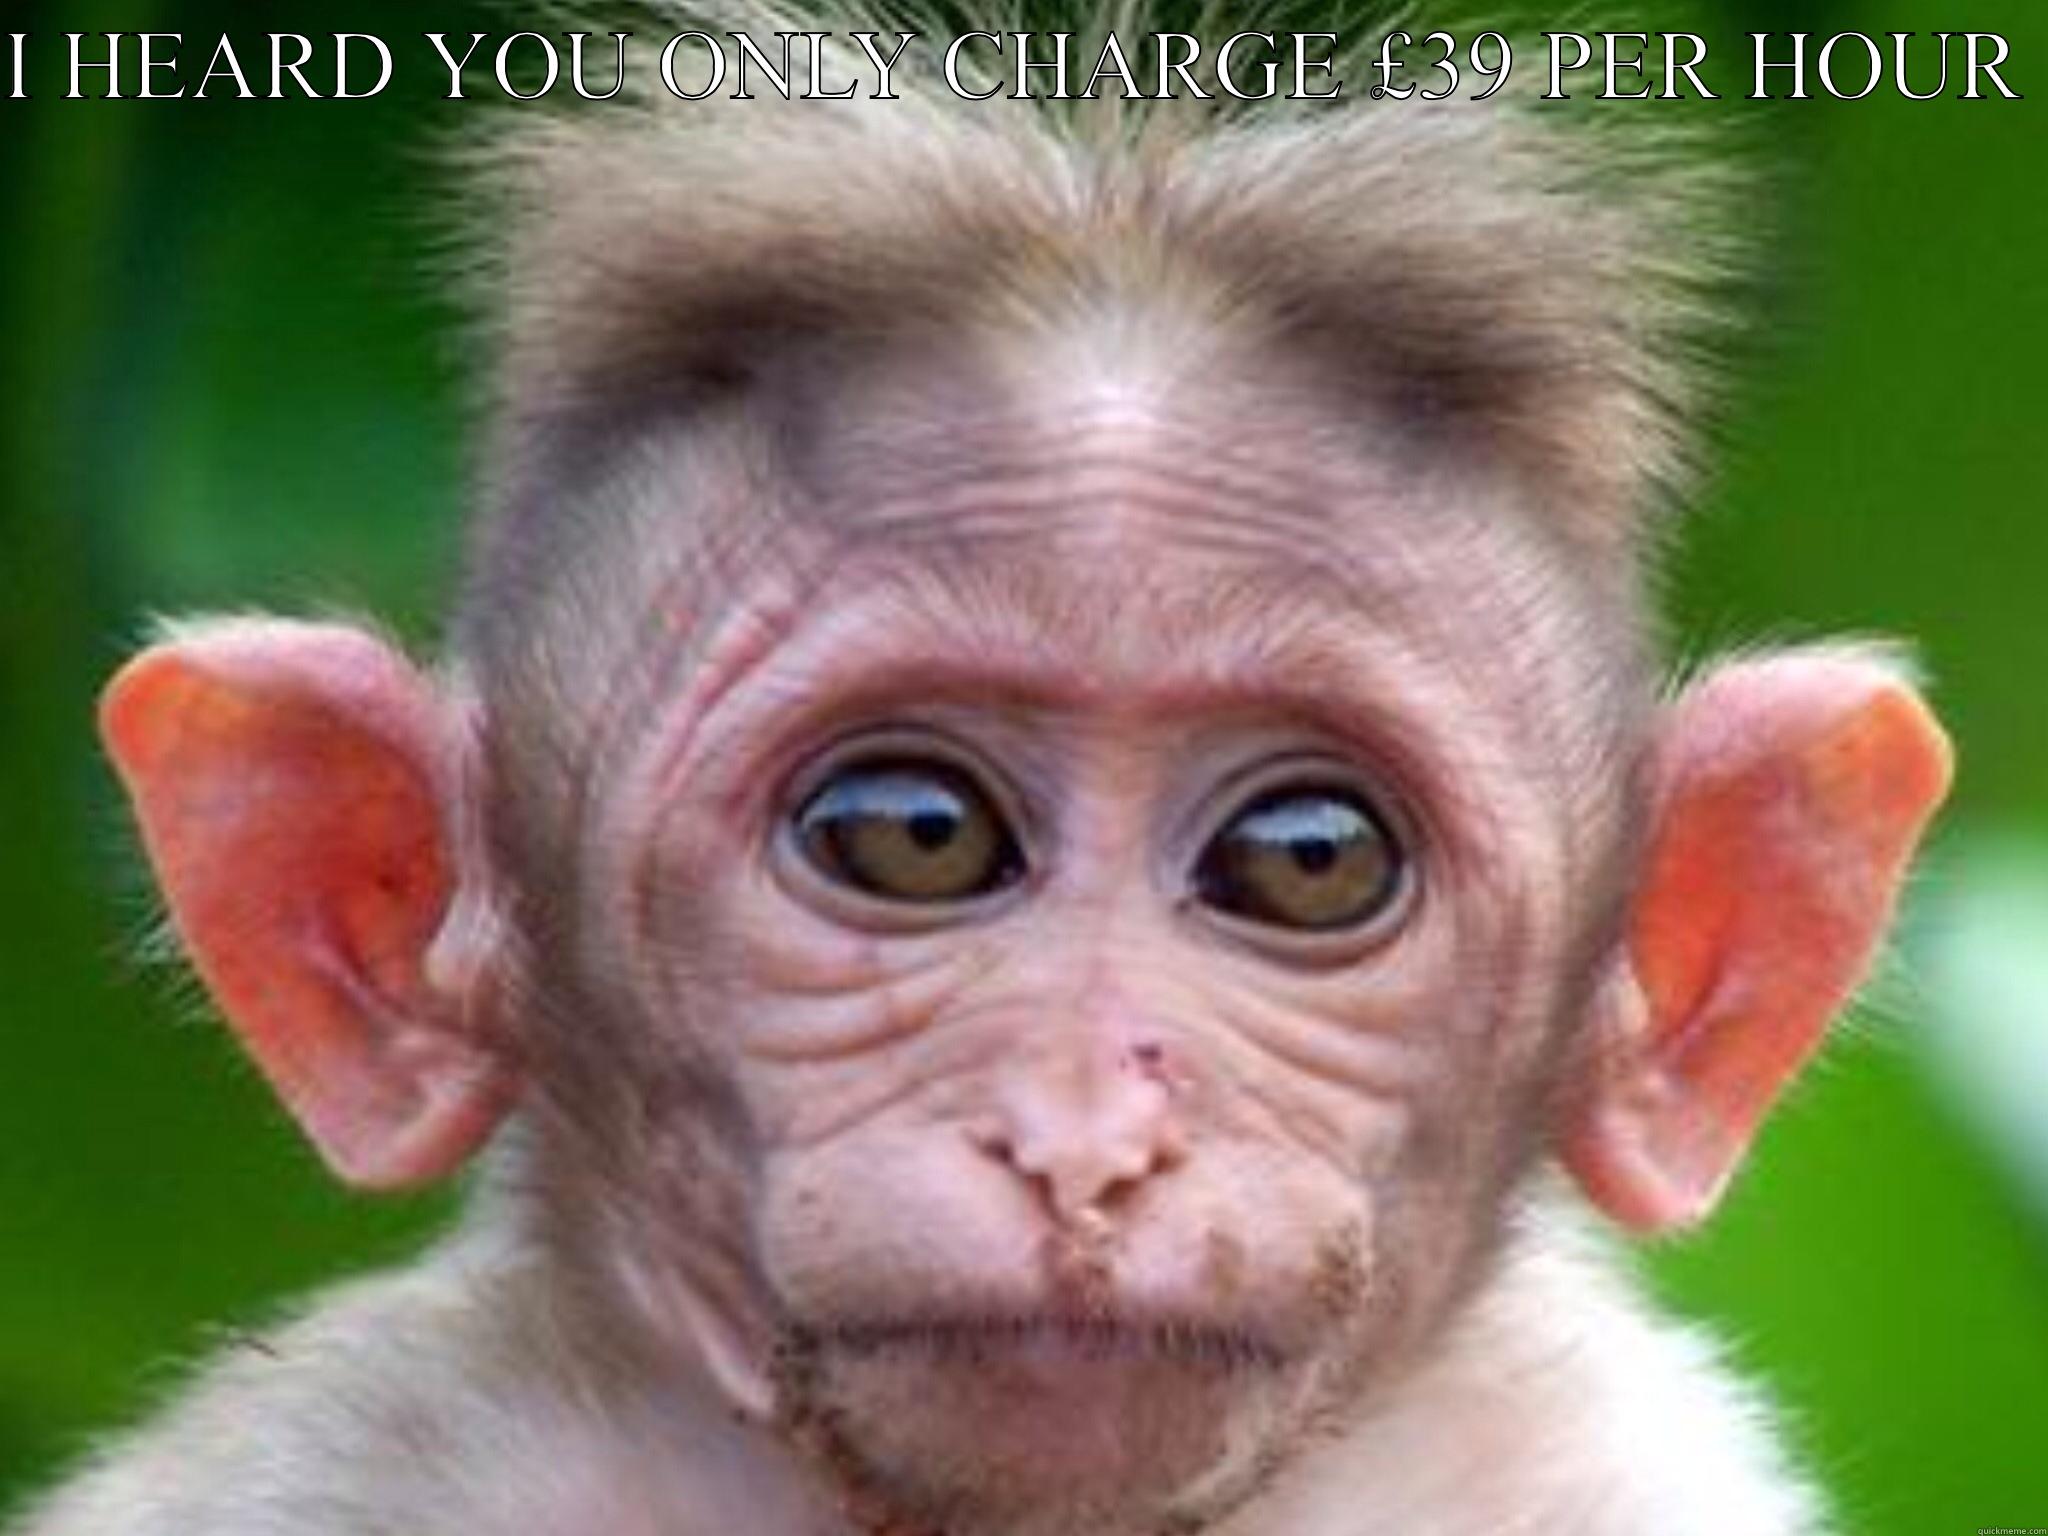 Massive ears monkey - I HEARD YOU ONLY CHARGE £39 PER HOUR  HTTPS://WWW.FACEBOOK.COM/BAUDAINSBROTHERS Misc